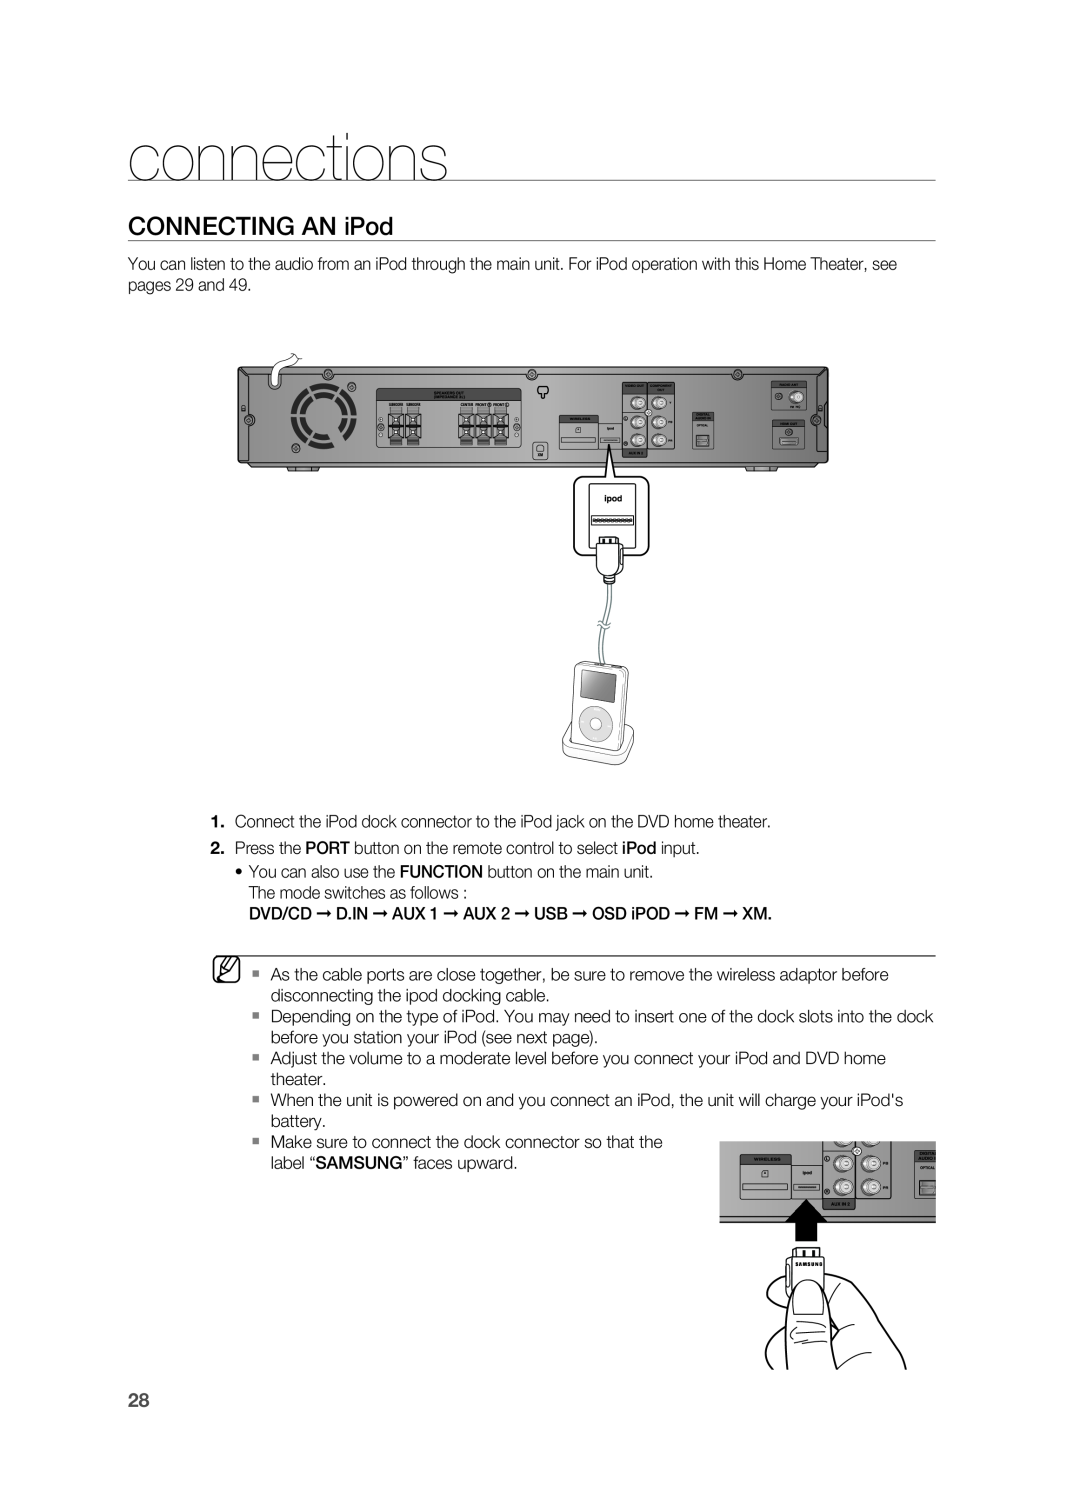 Samsung HT-Z510 manual Connecting an iPod, connections 